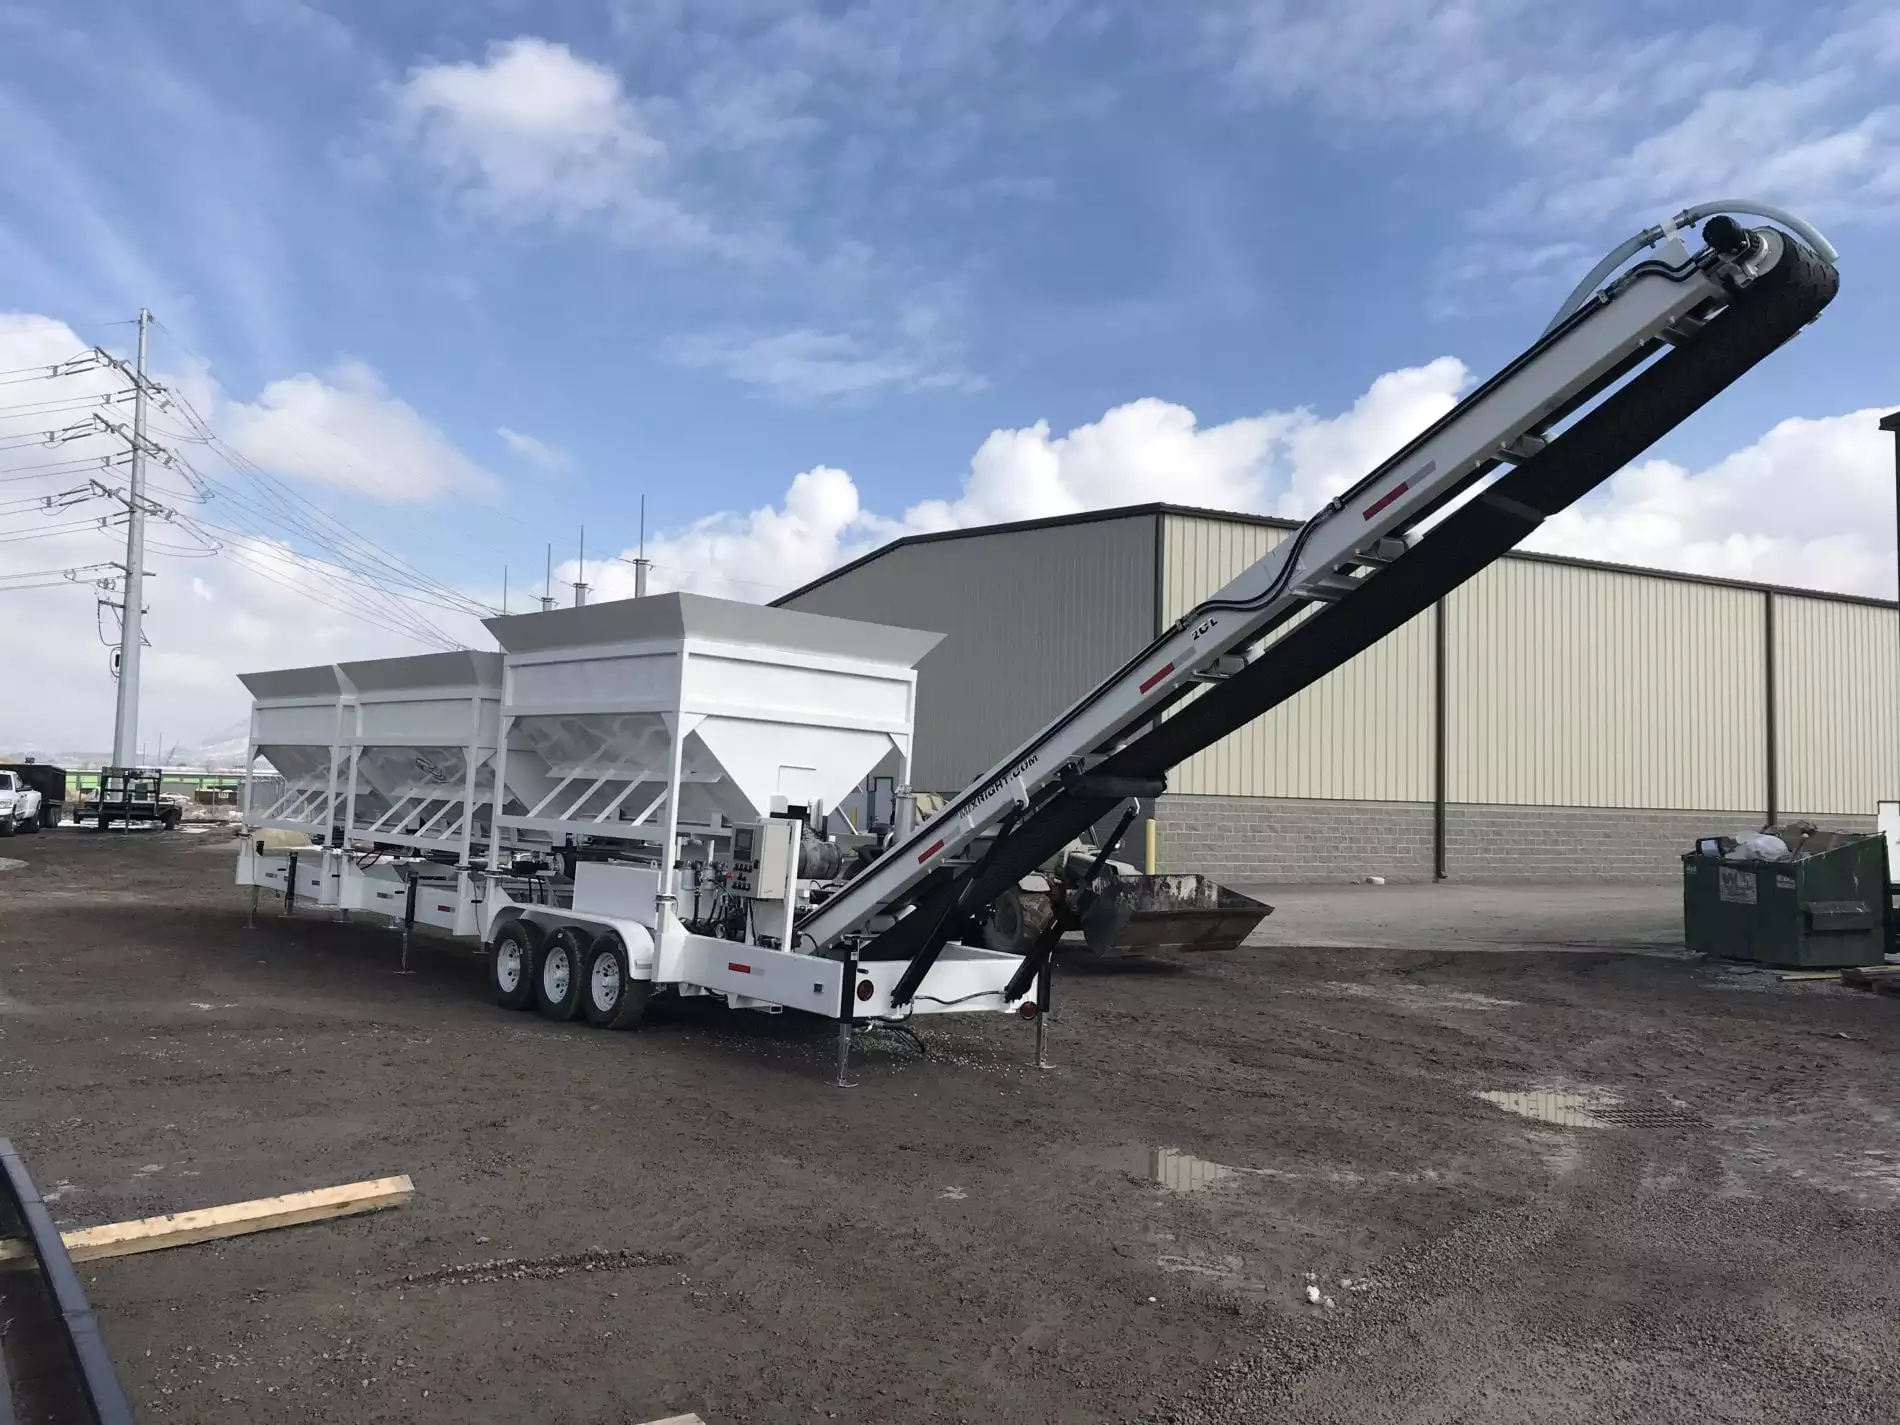 Portable Concrete Batching Plant 36+ Cubic Yards Automated Mix Right 2CL-36-3 Conveyor at Right Manufacturing Systems Inc. Lindon, Utah